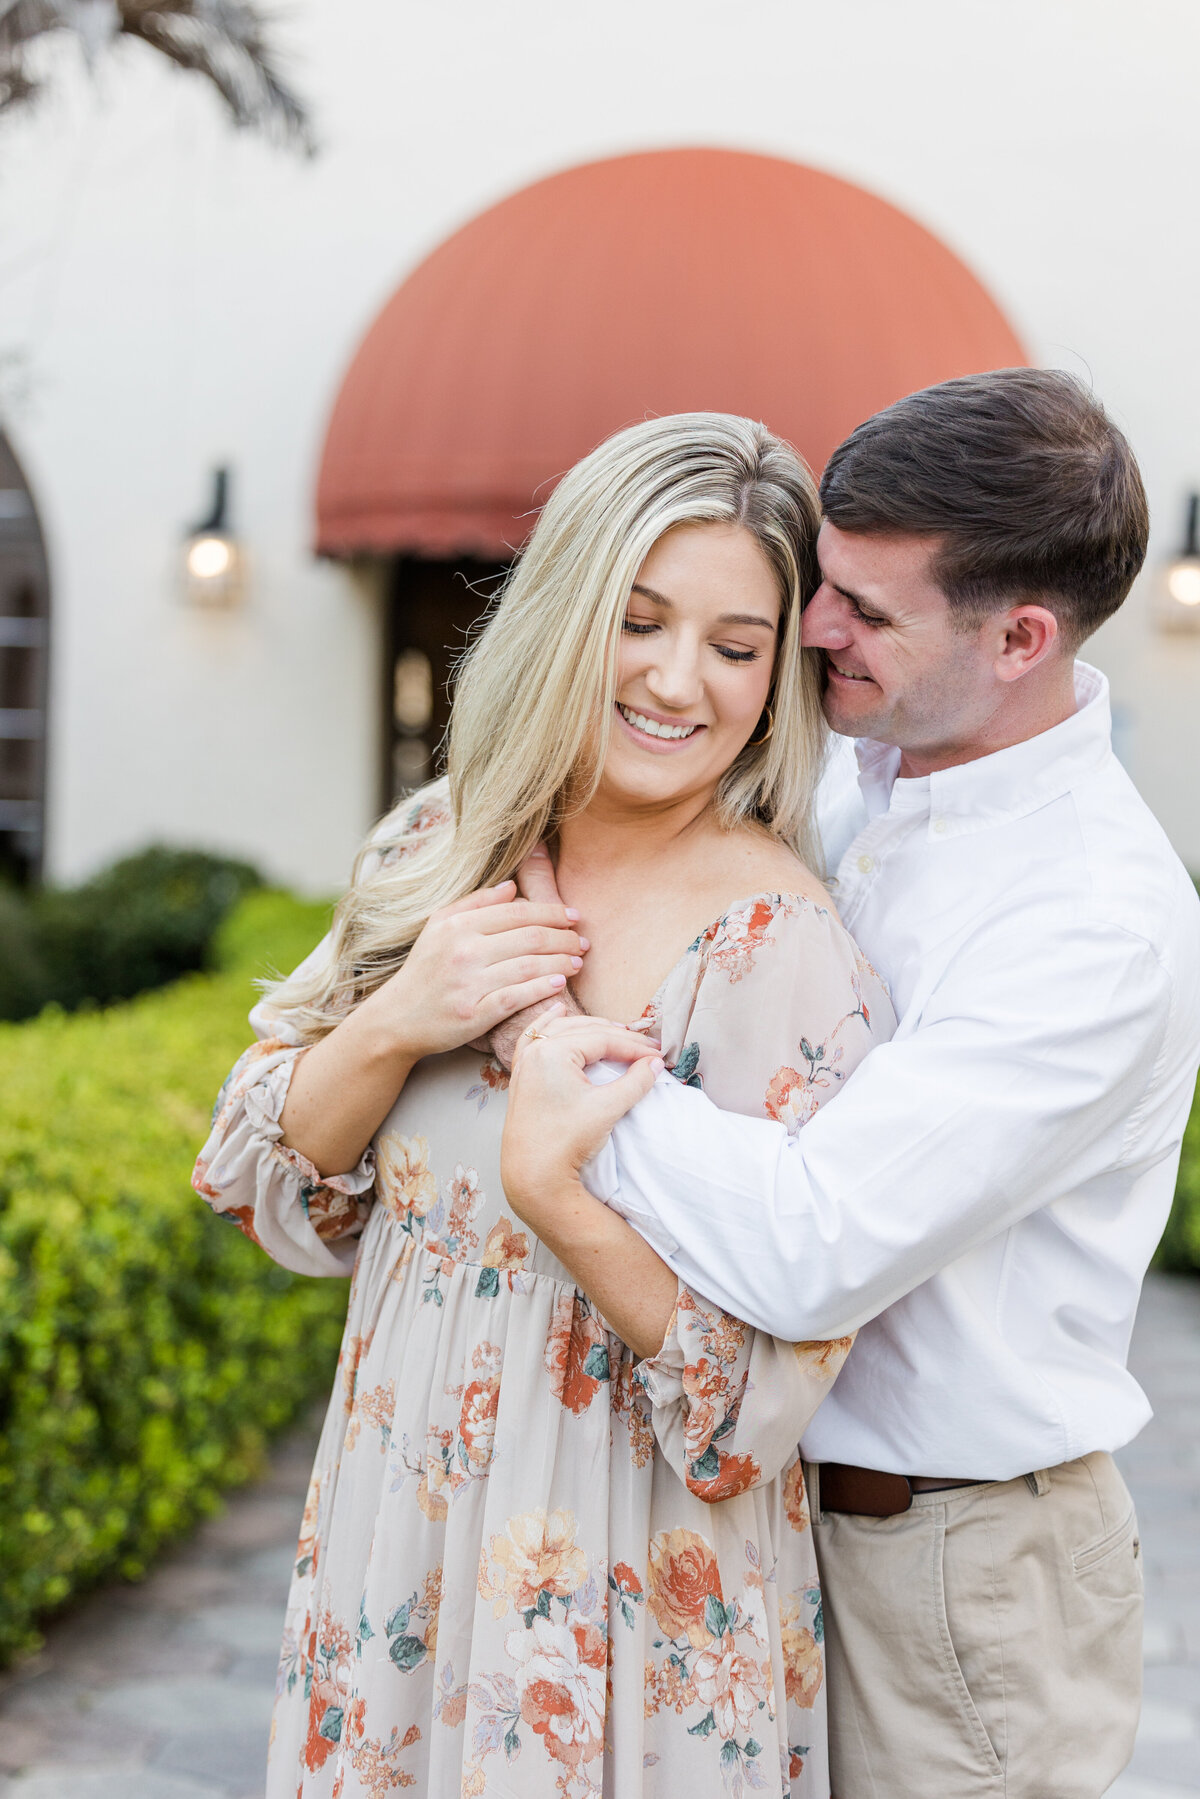 Mary Warren Engagement Session - Taylor'd Southern Events - Florida Wedding Photographer-5894